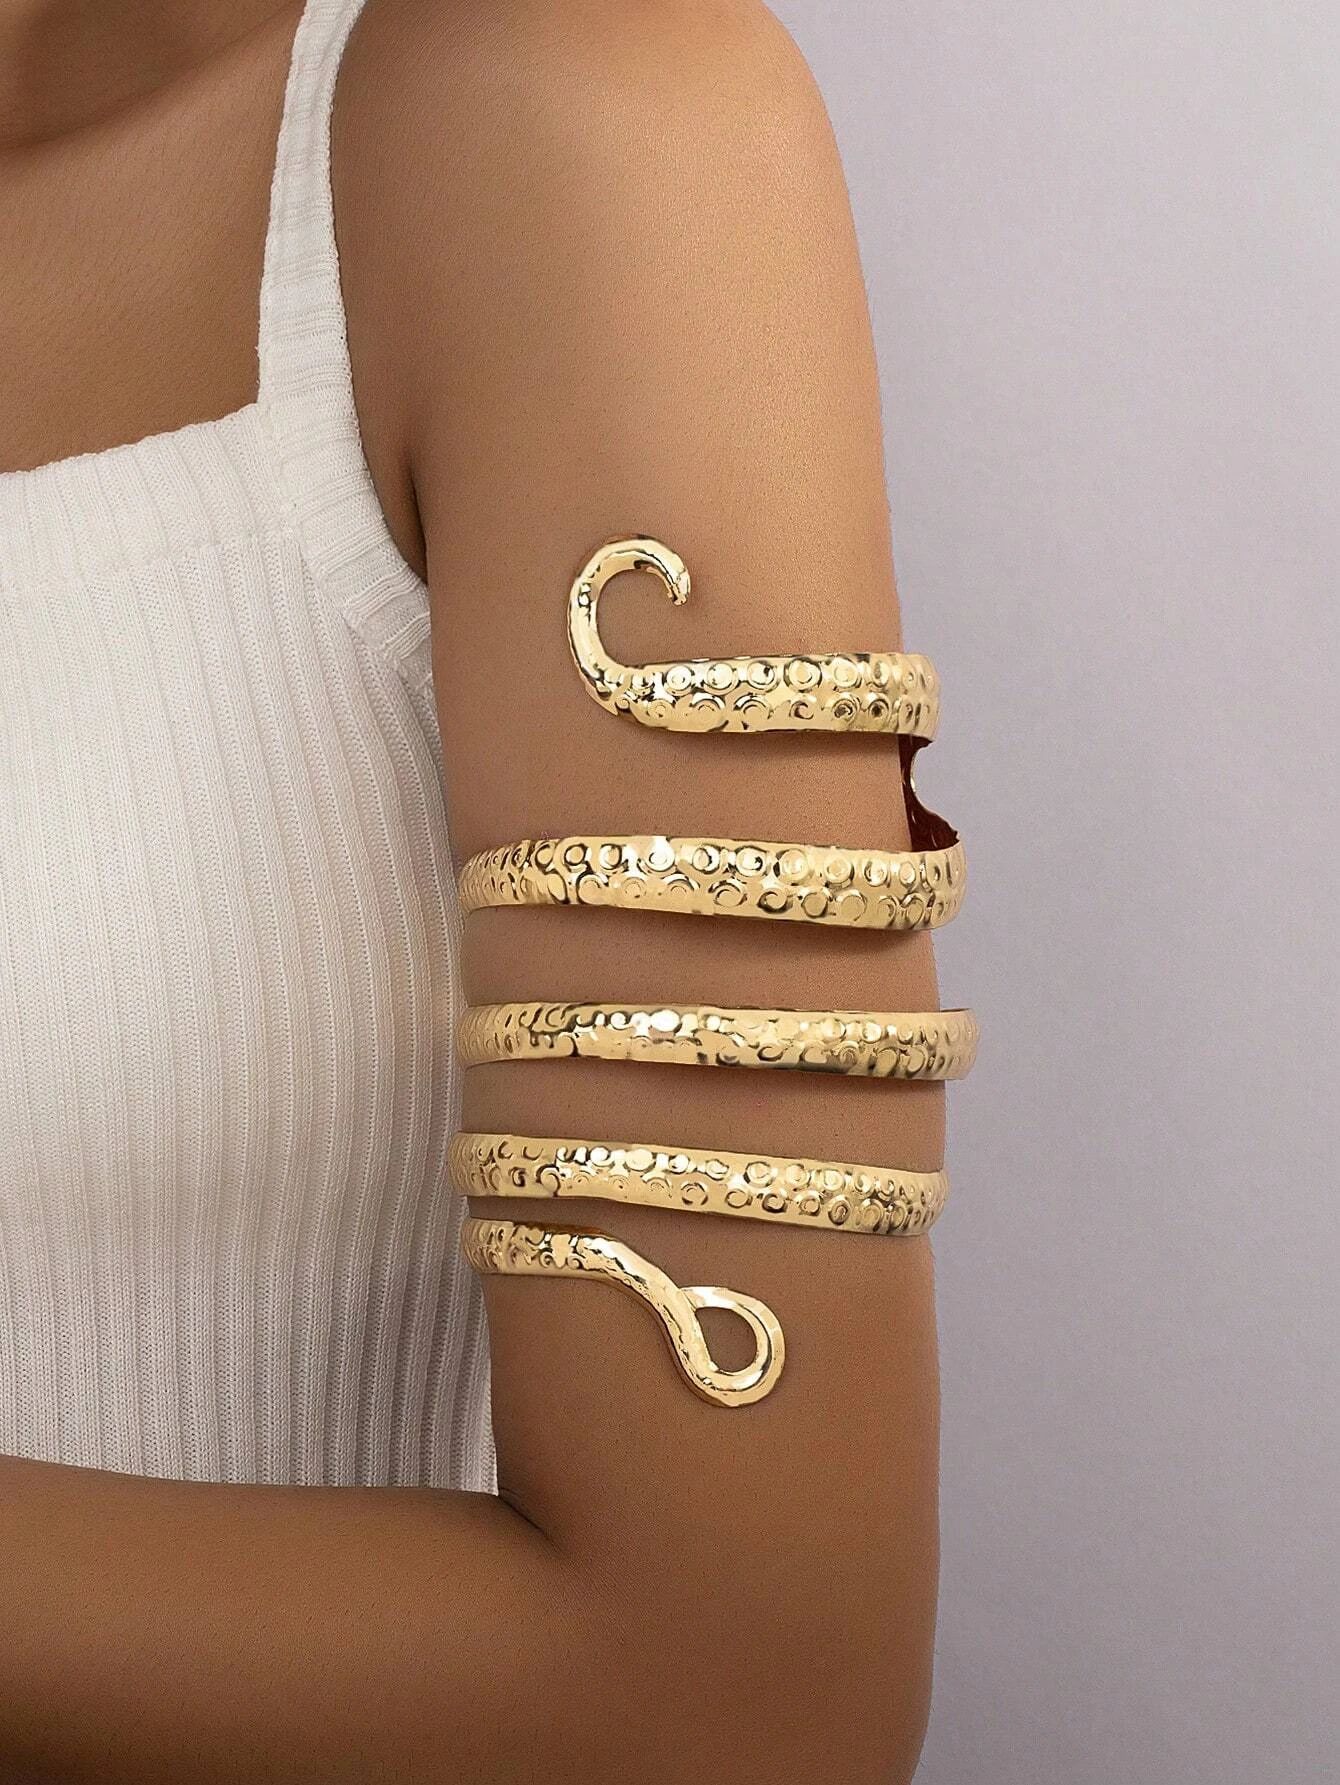 Snake Design Arm Cuff  SKU: sj2304188263809908$2.60$2.47Join for an Exclusive 5% OFFS3 ExclusiveT... | SHEIN